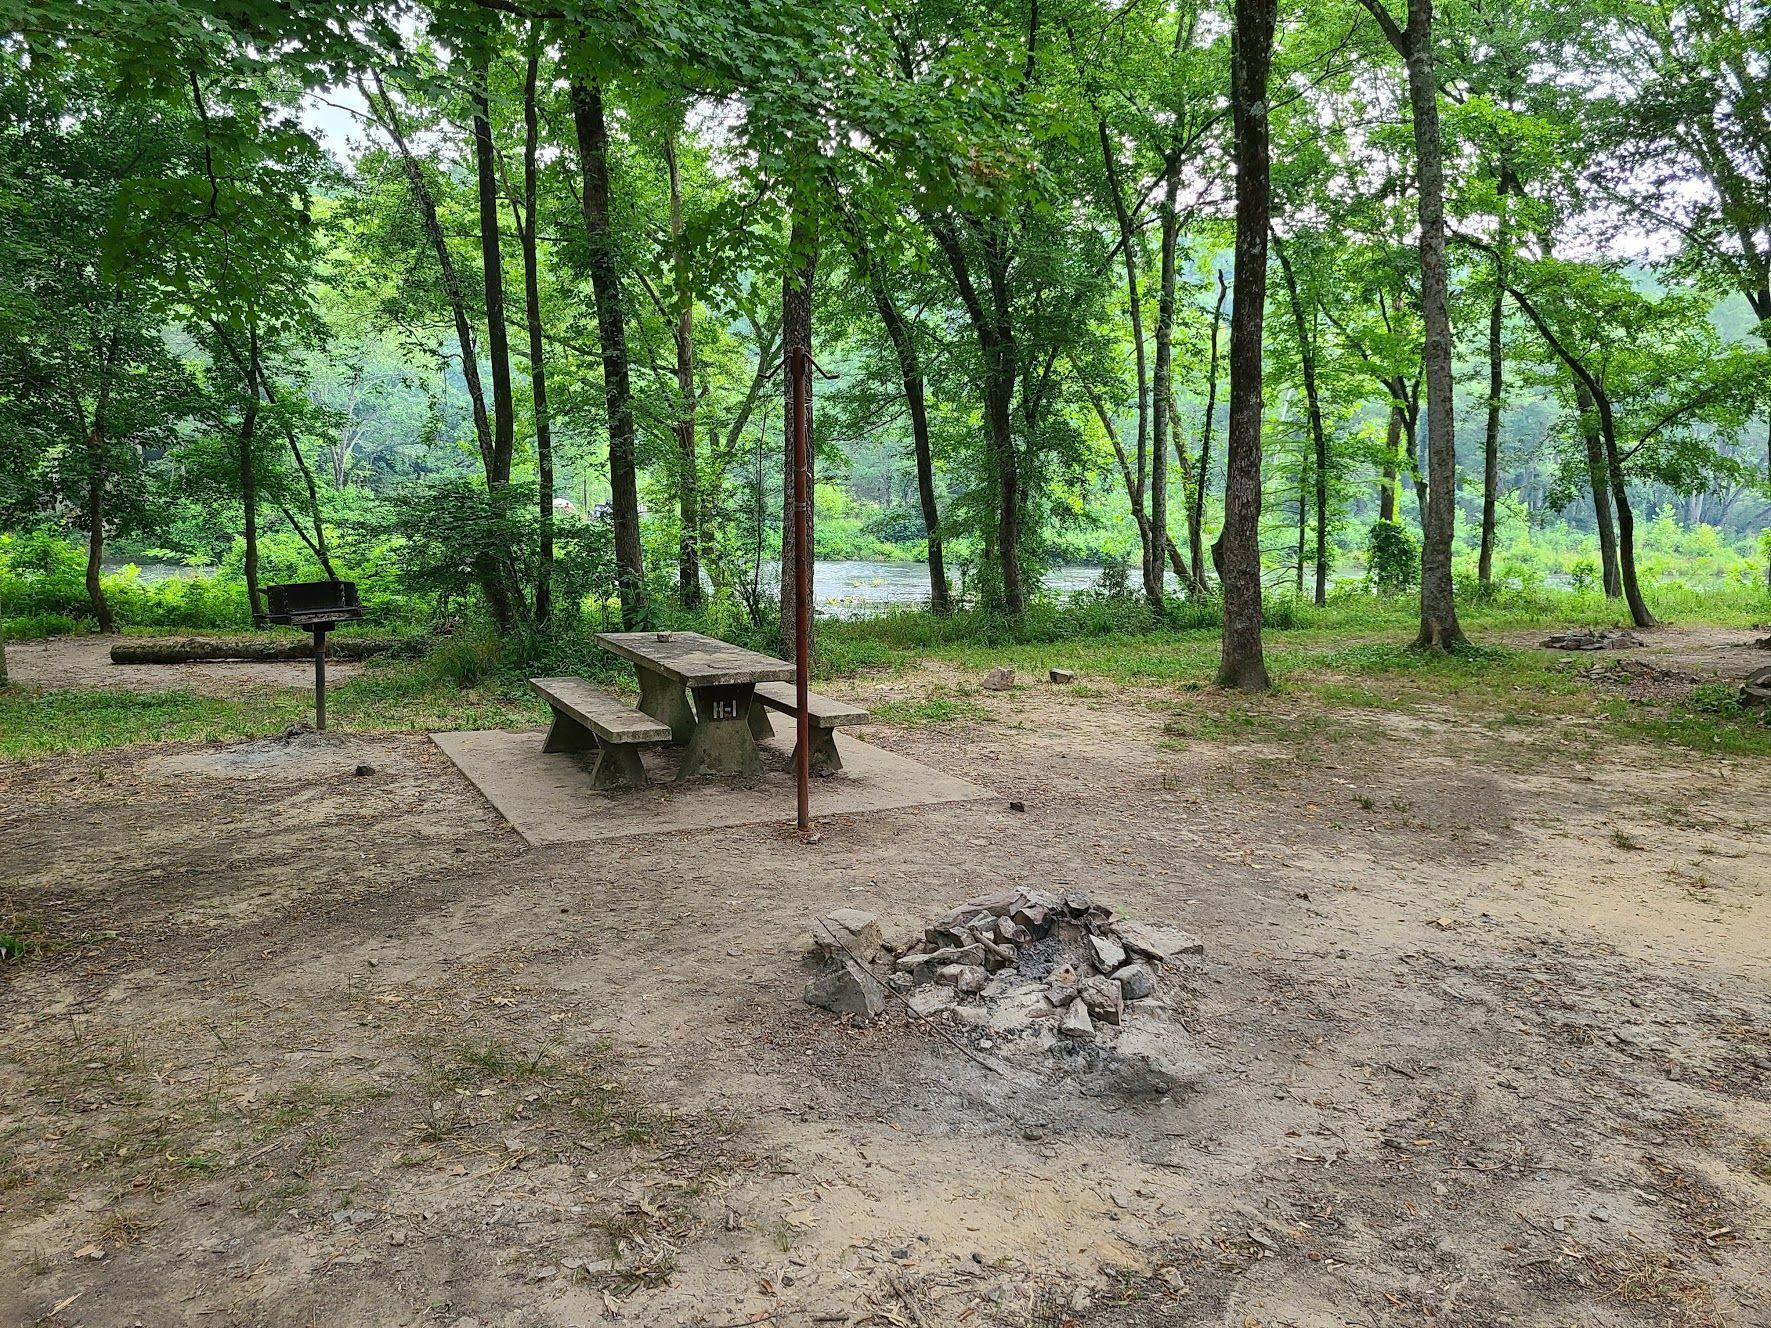 A campsite with a firepit, a picnic table and a grill. There are trees and a small peek at a river in the background.